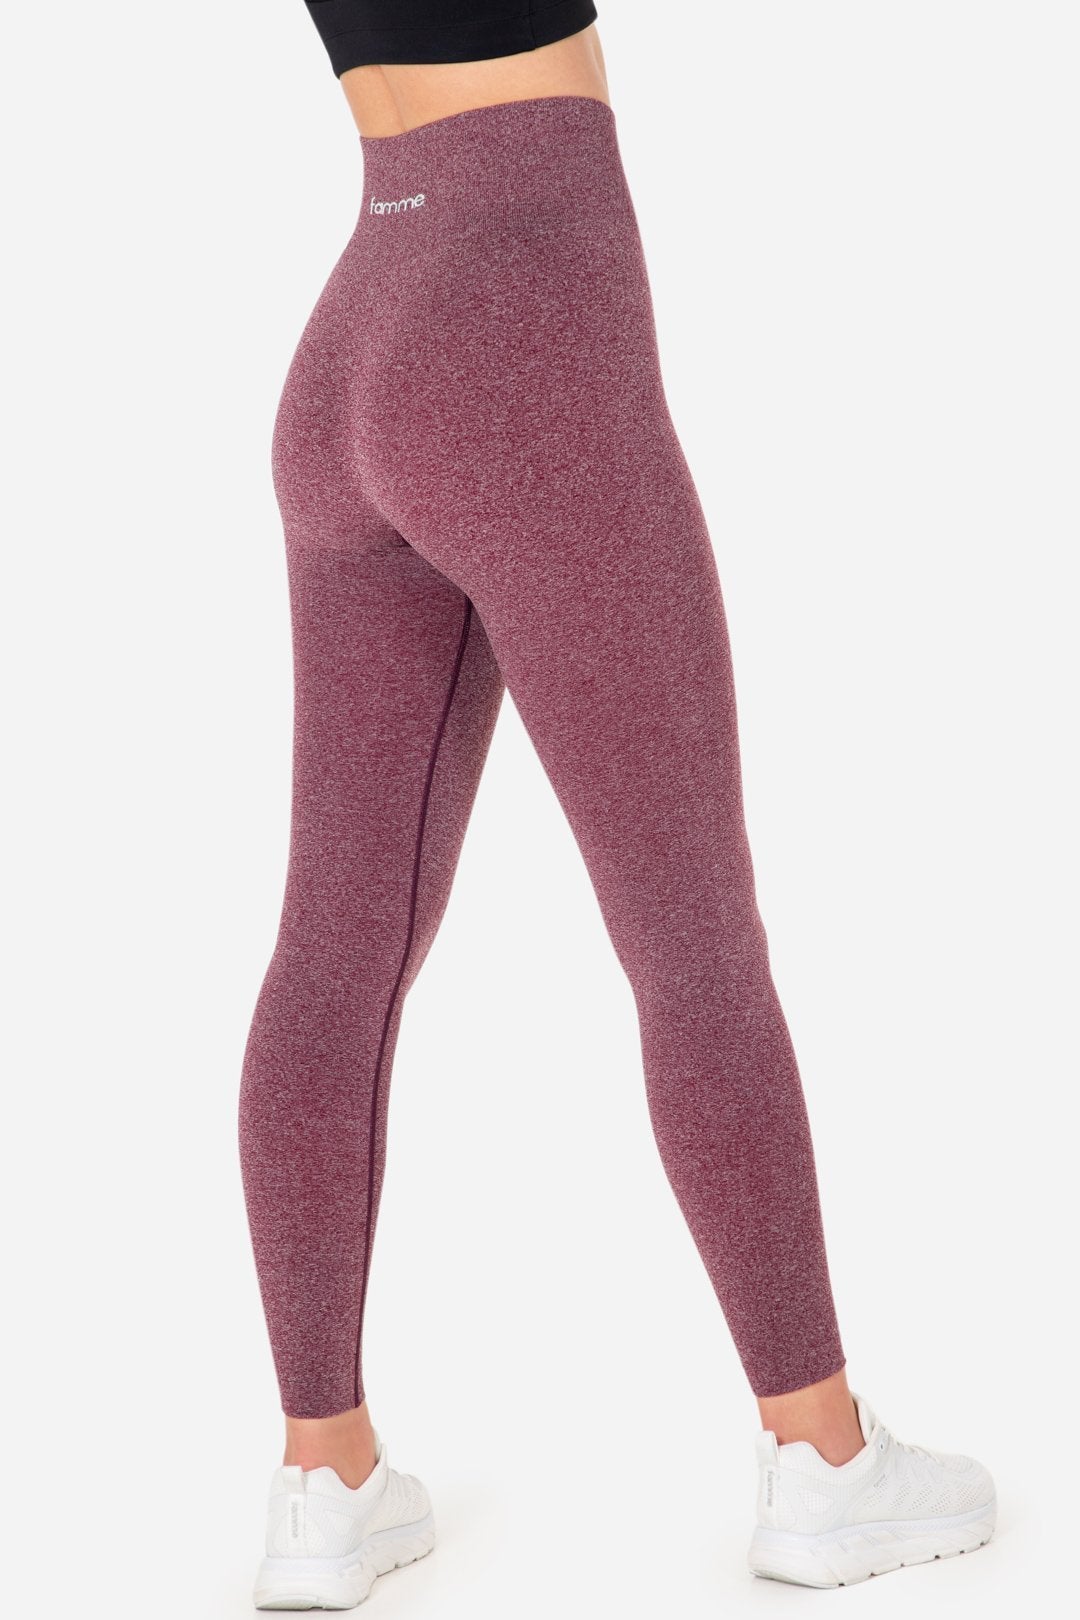 Purple Fit Tights - for dame - Famme - Leggings